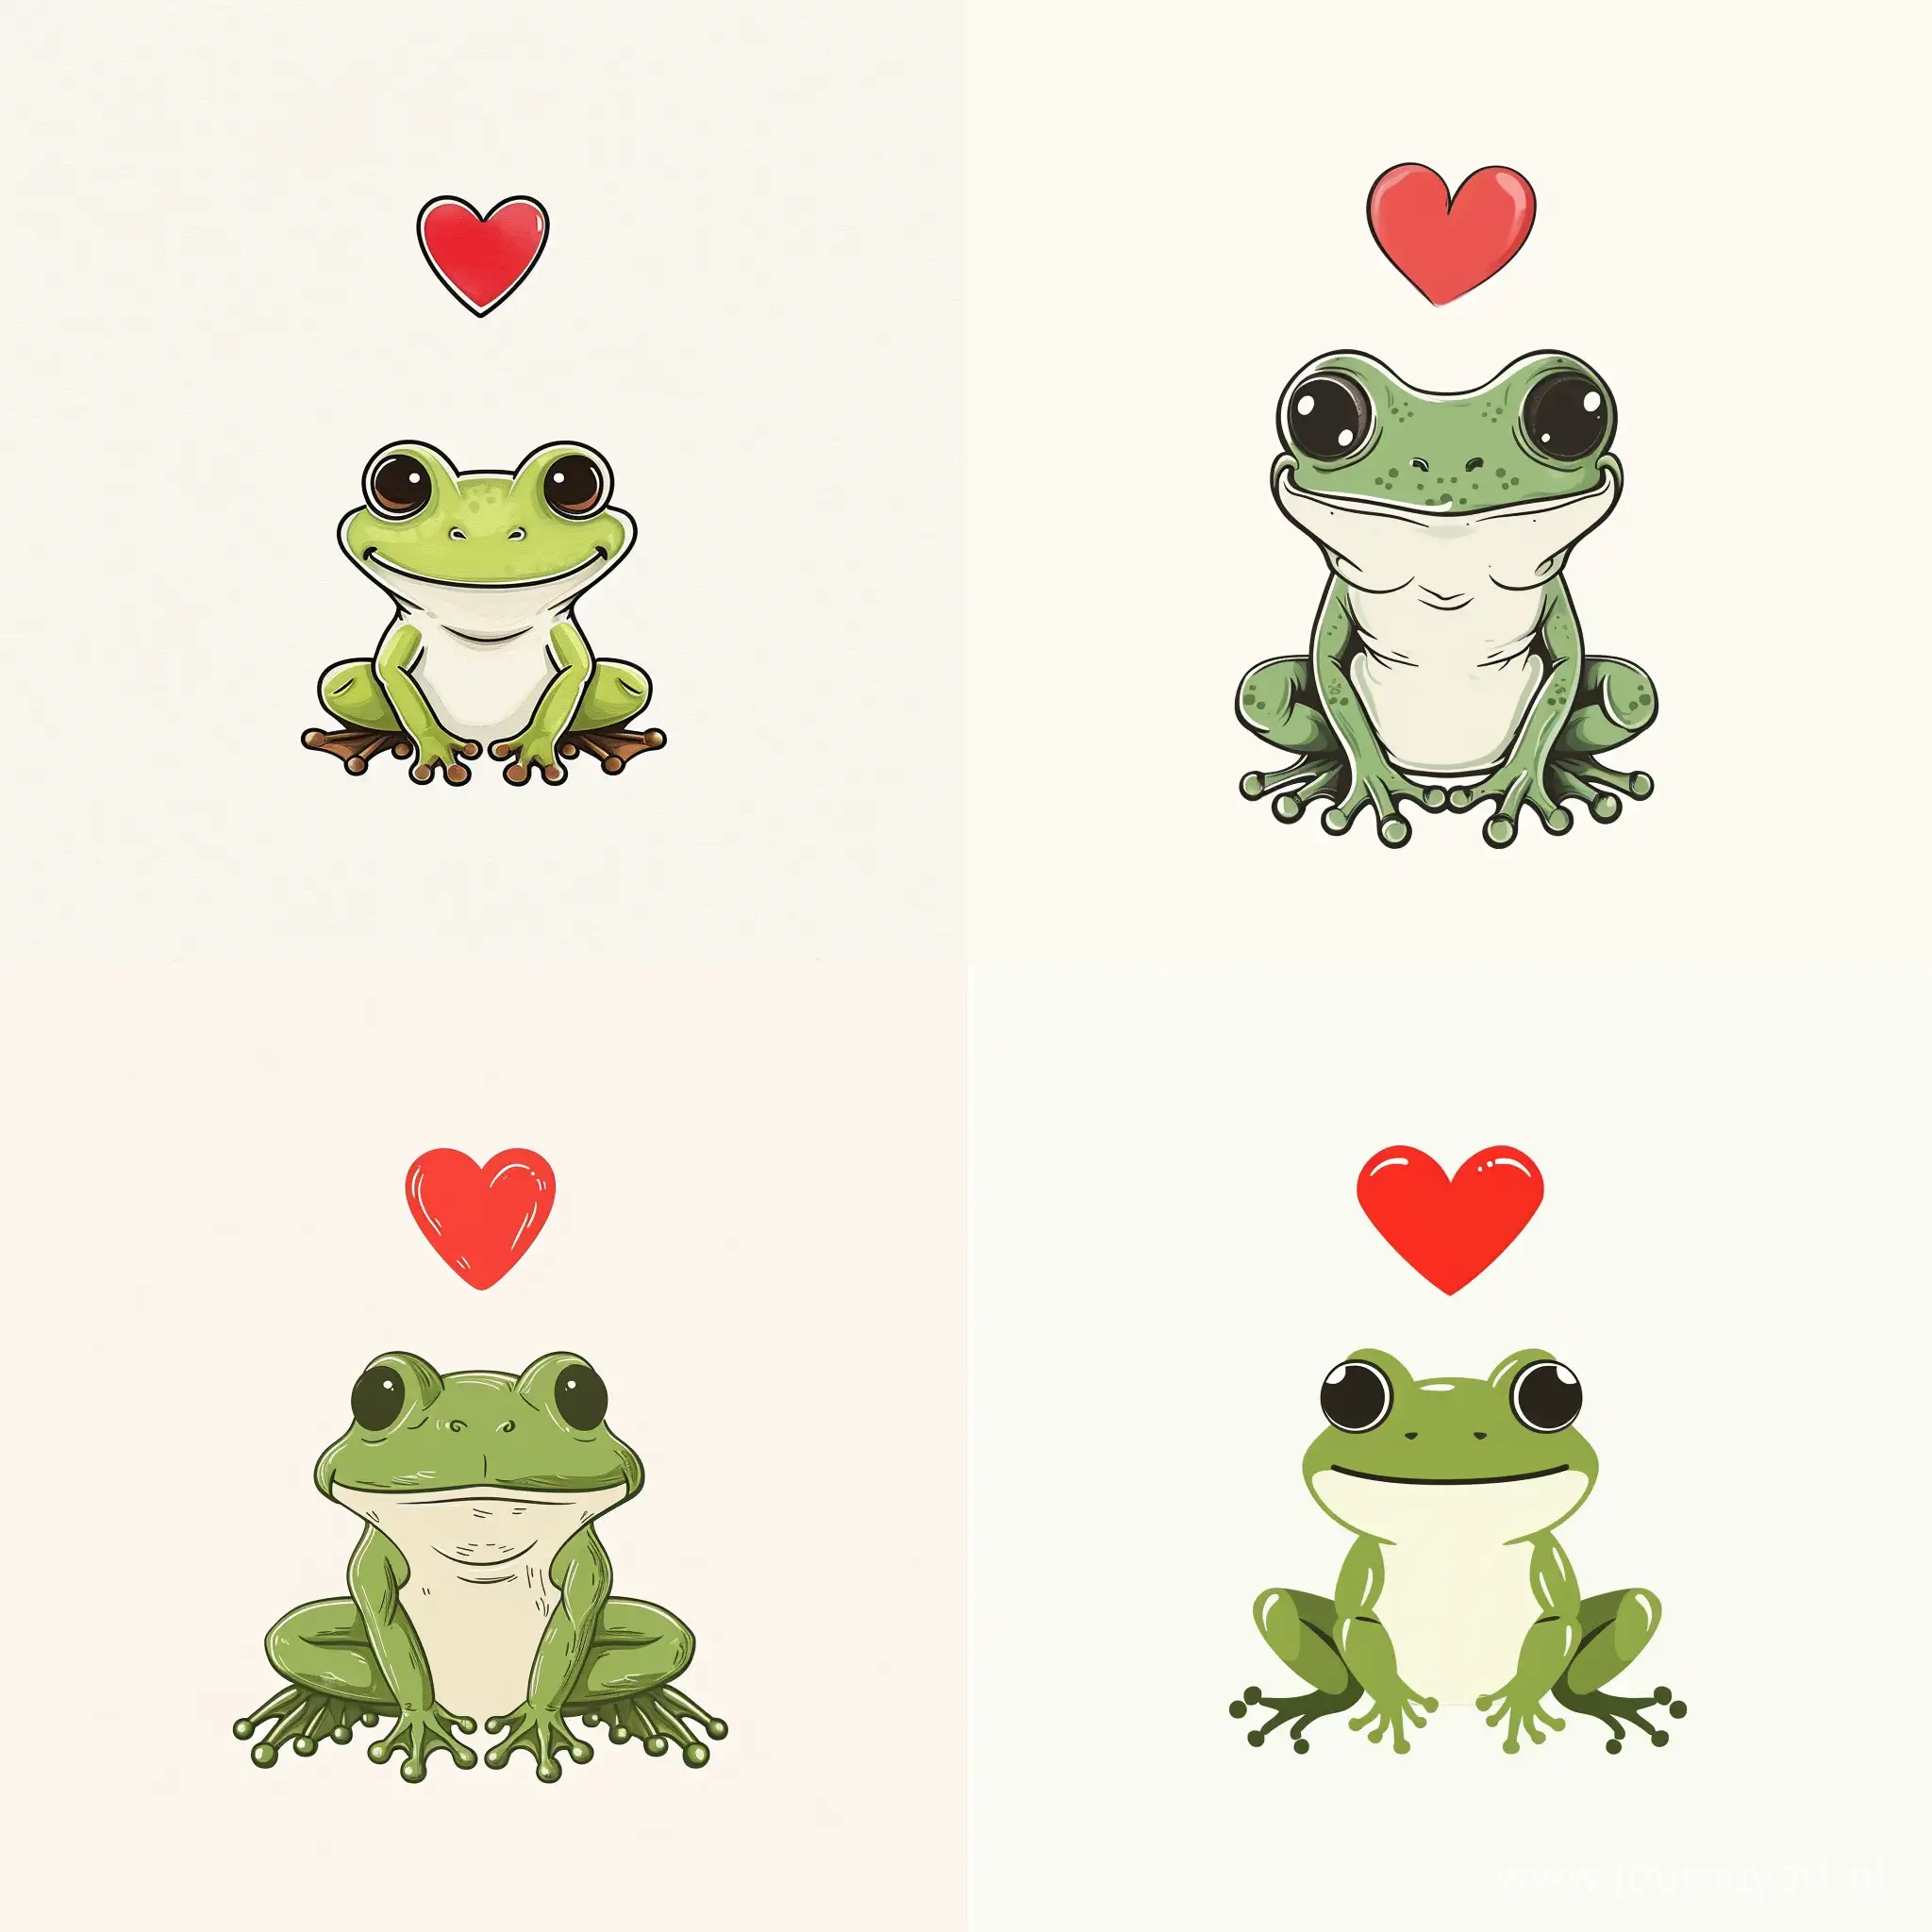 Cute minimalistic cartoon green frog on a white background, with a red heart above its head